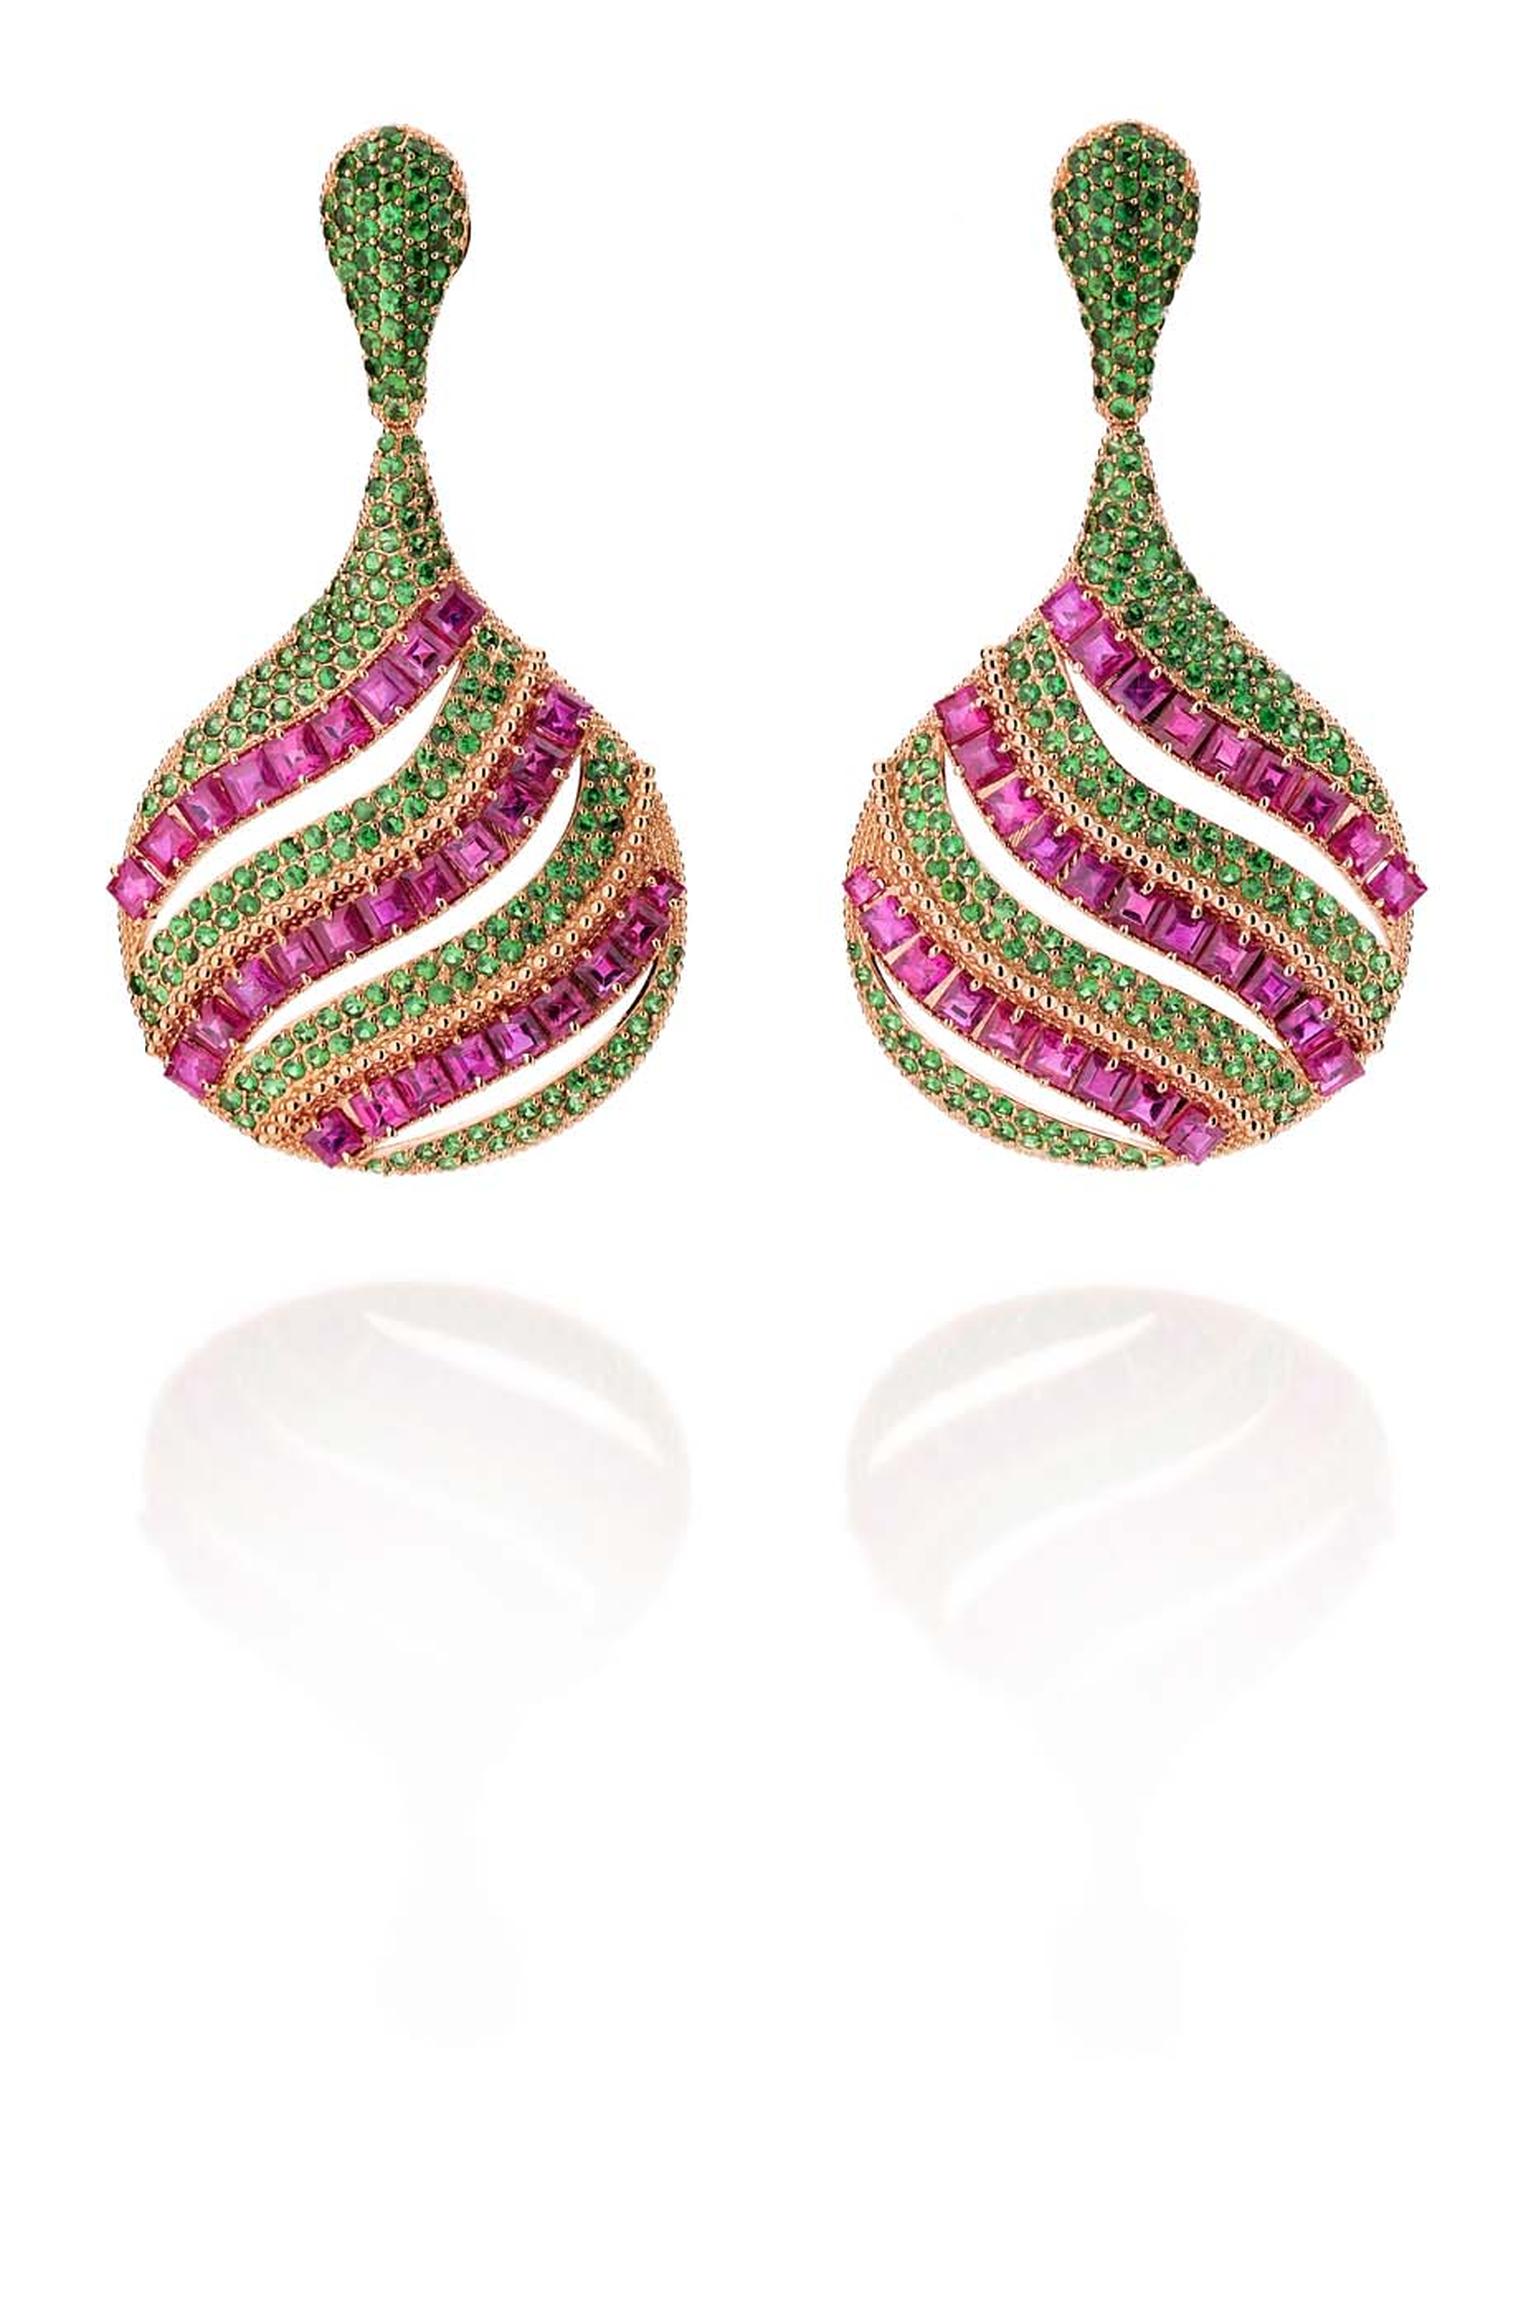 Carla Amorim Russia collection St Basil earrings with rubies and tsavorites, inspired by the colourful domes of the cathedral